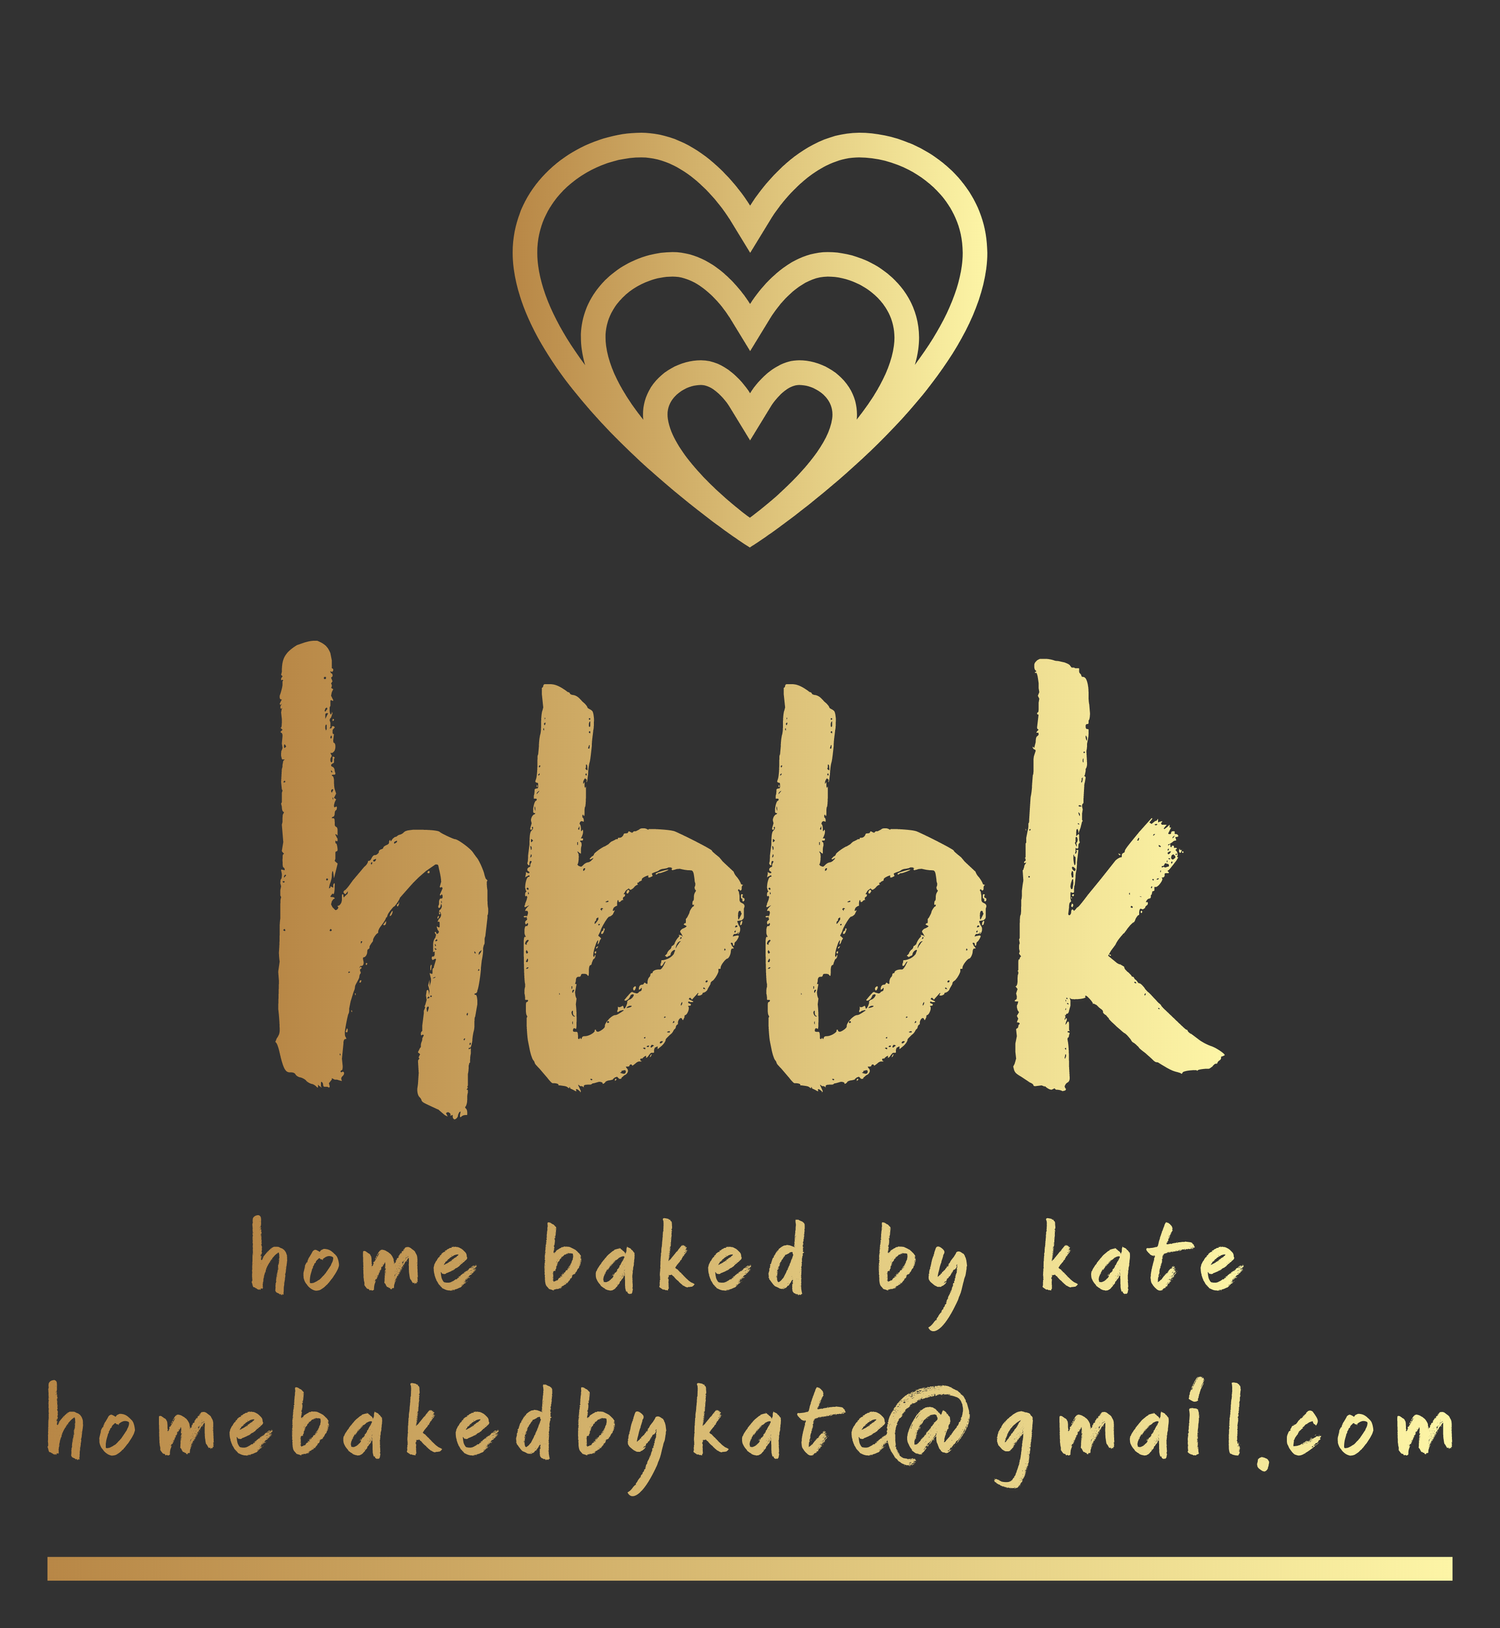 Home Baked by Kate - HBBK